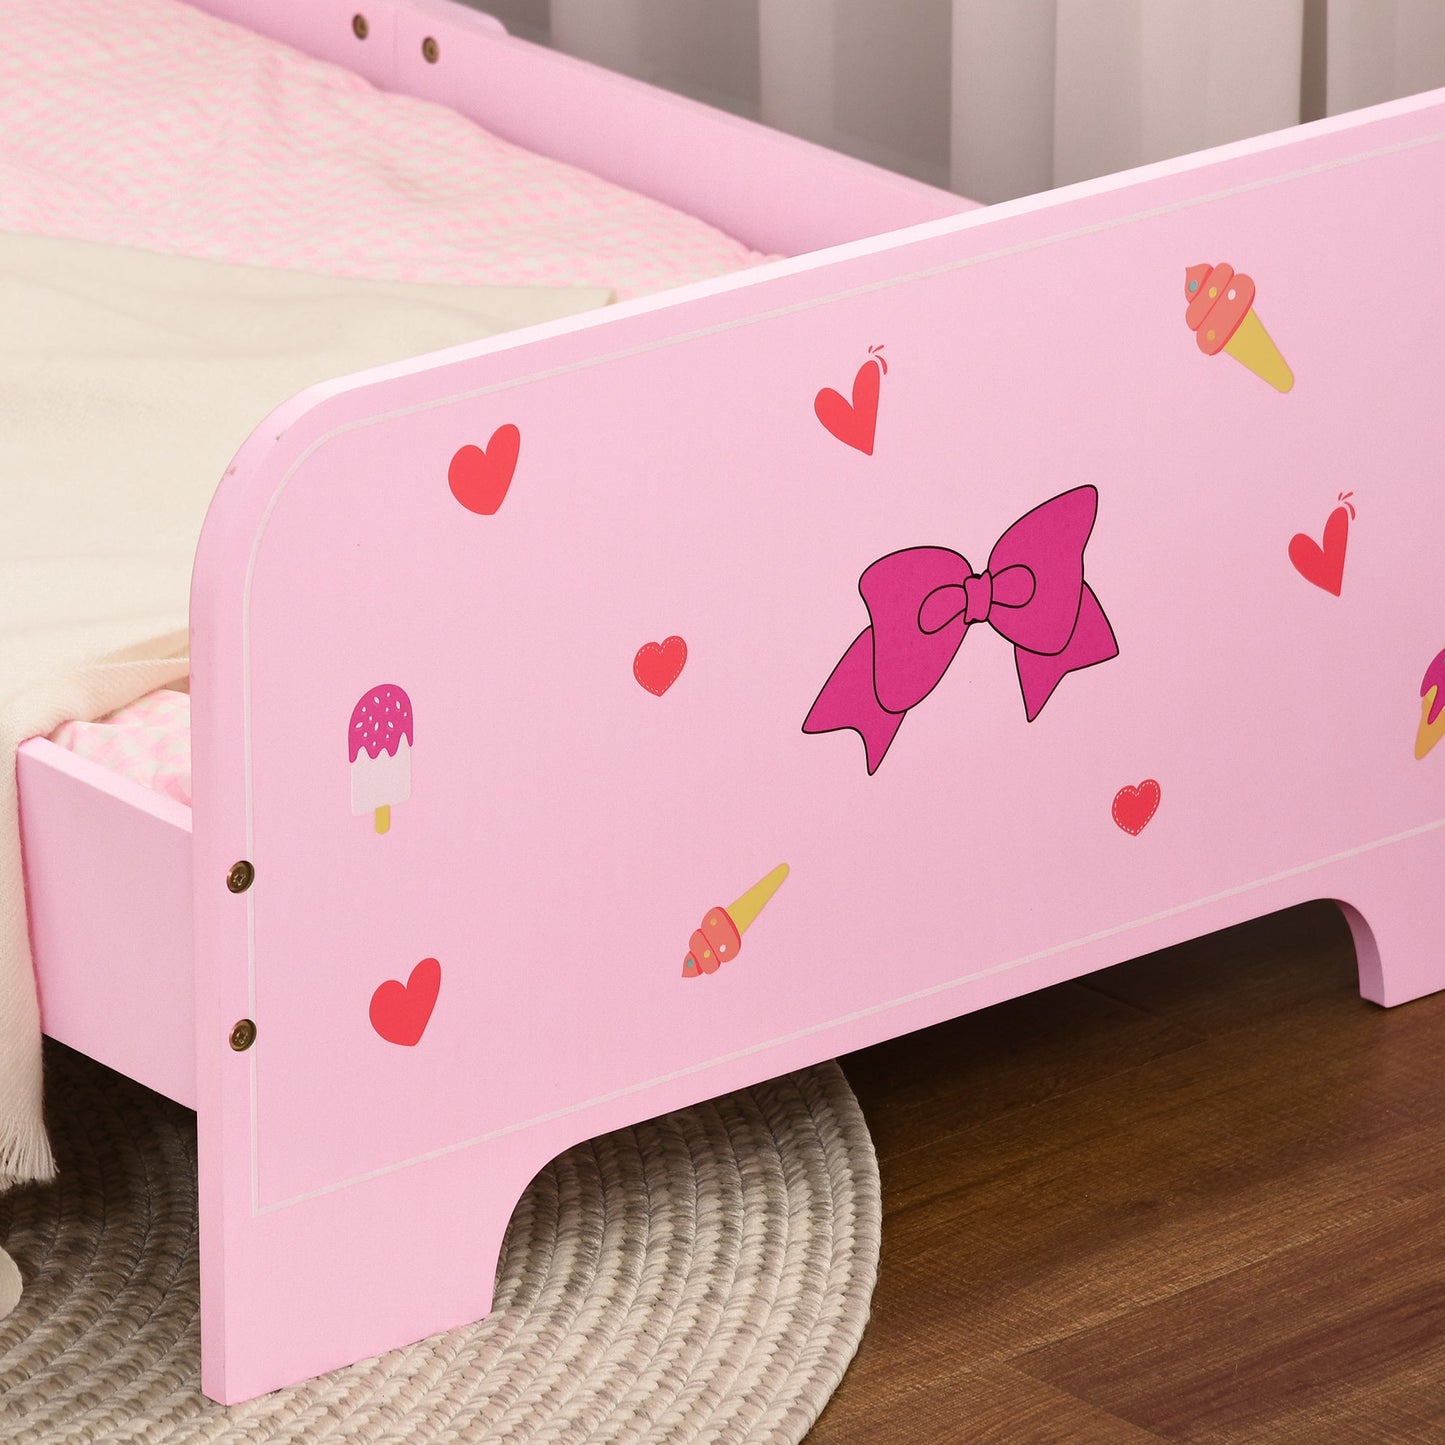 ZONEKIZ Princess-themed Kids Toddler Bed with Cute Patterns, Safety Side Rails Slats, Kids Bedroom Furniture for 3-6 Years, Pink, 143 x 74 x 59 cm